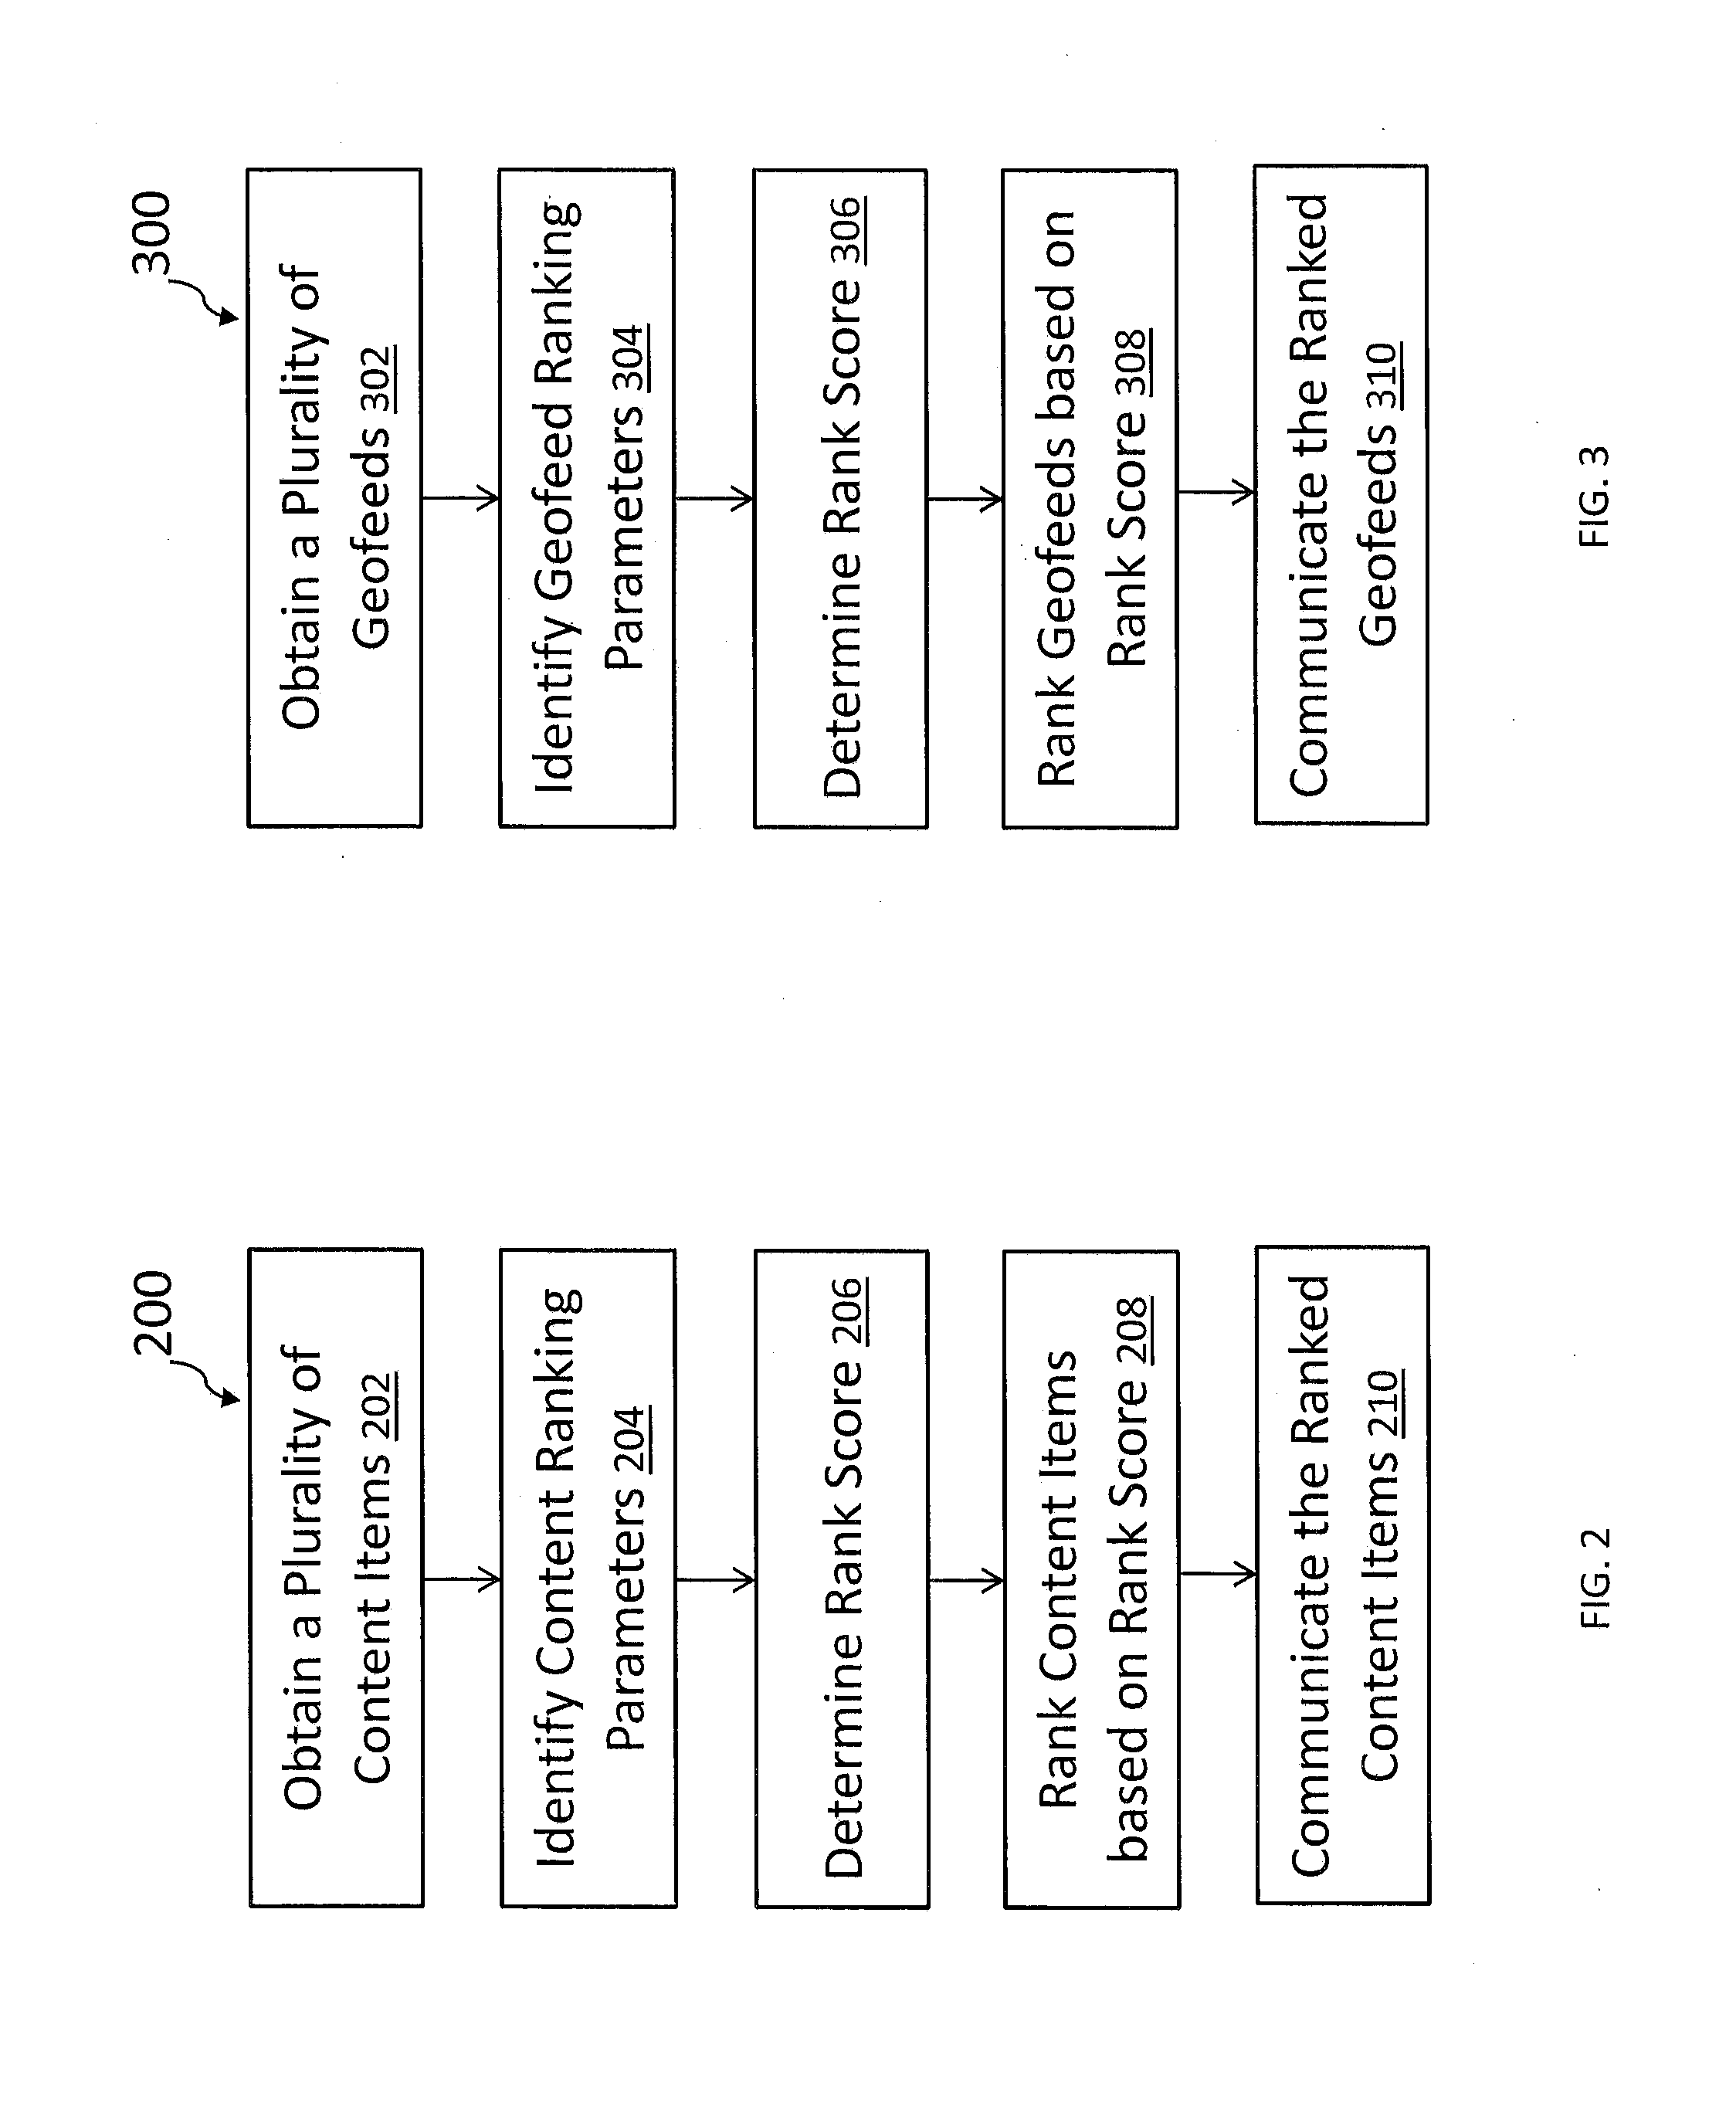 System and method for ranking geofeeds and content within geofeeds